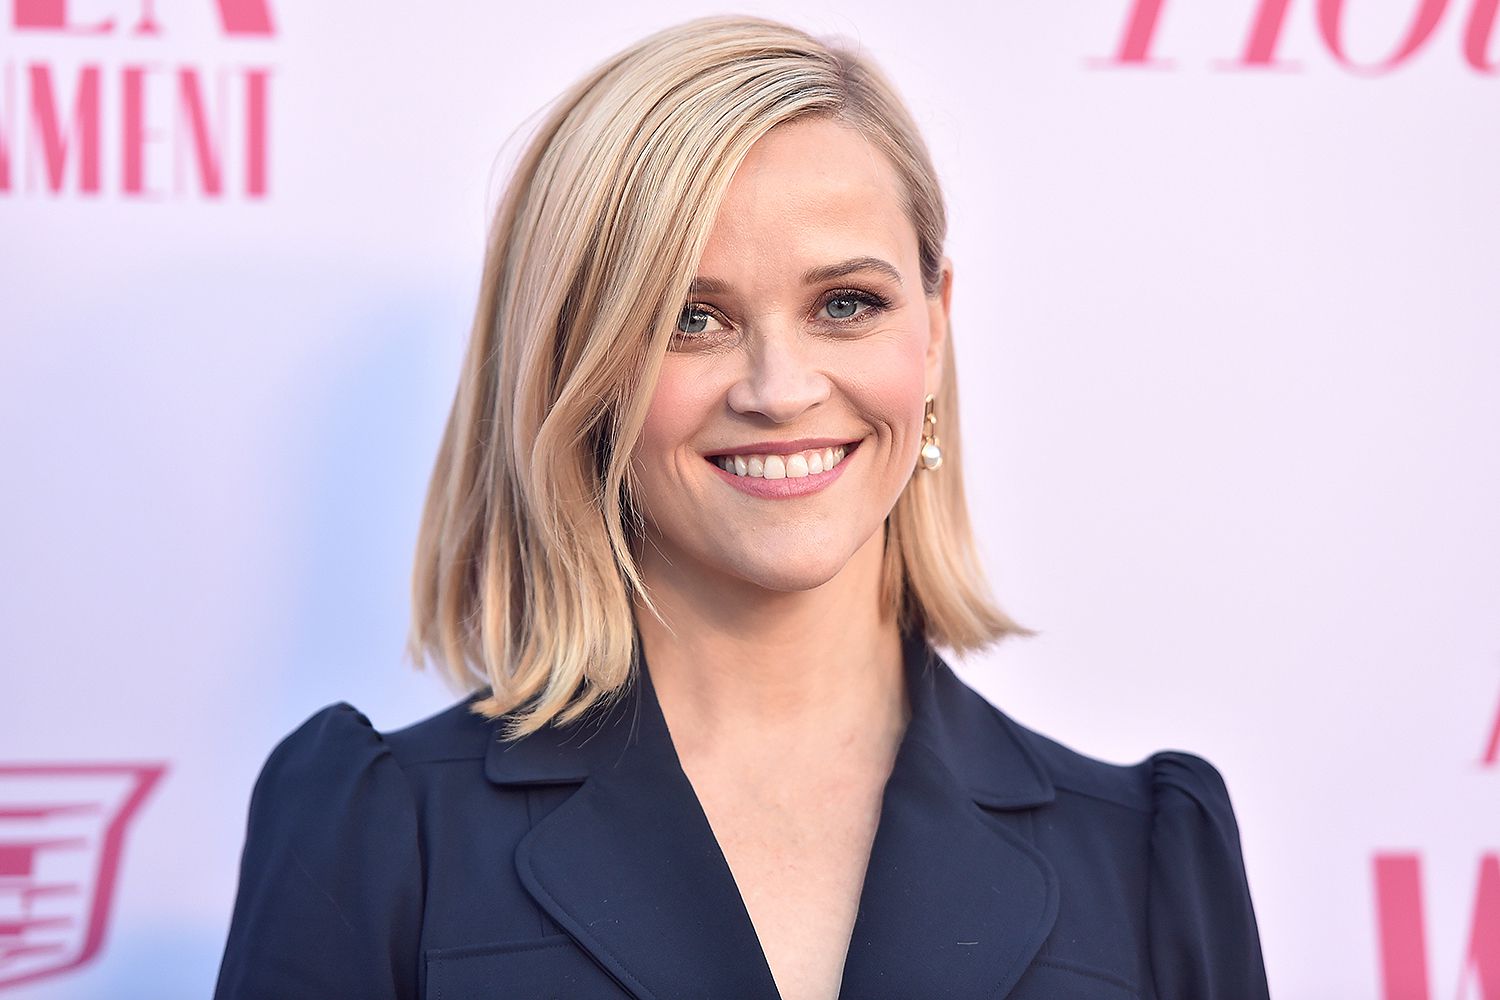 reese-witherspoon-15f7e96b12924fb7badebd62ecbfca36